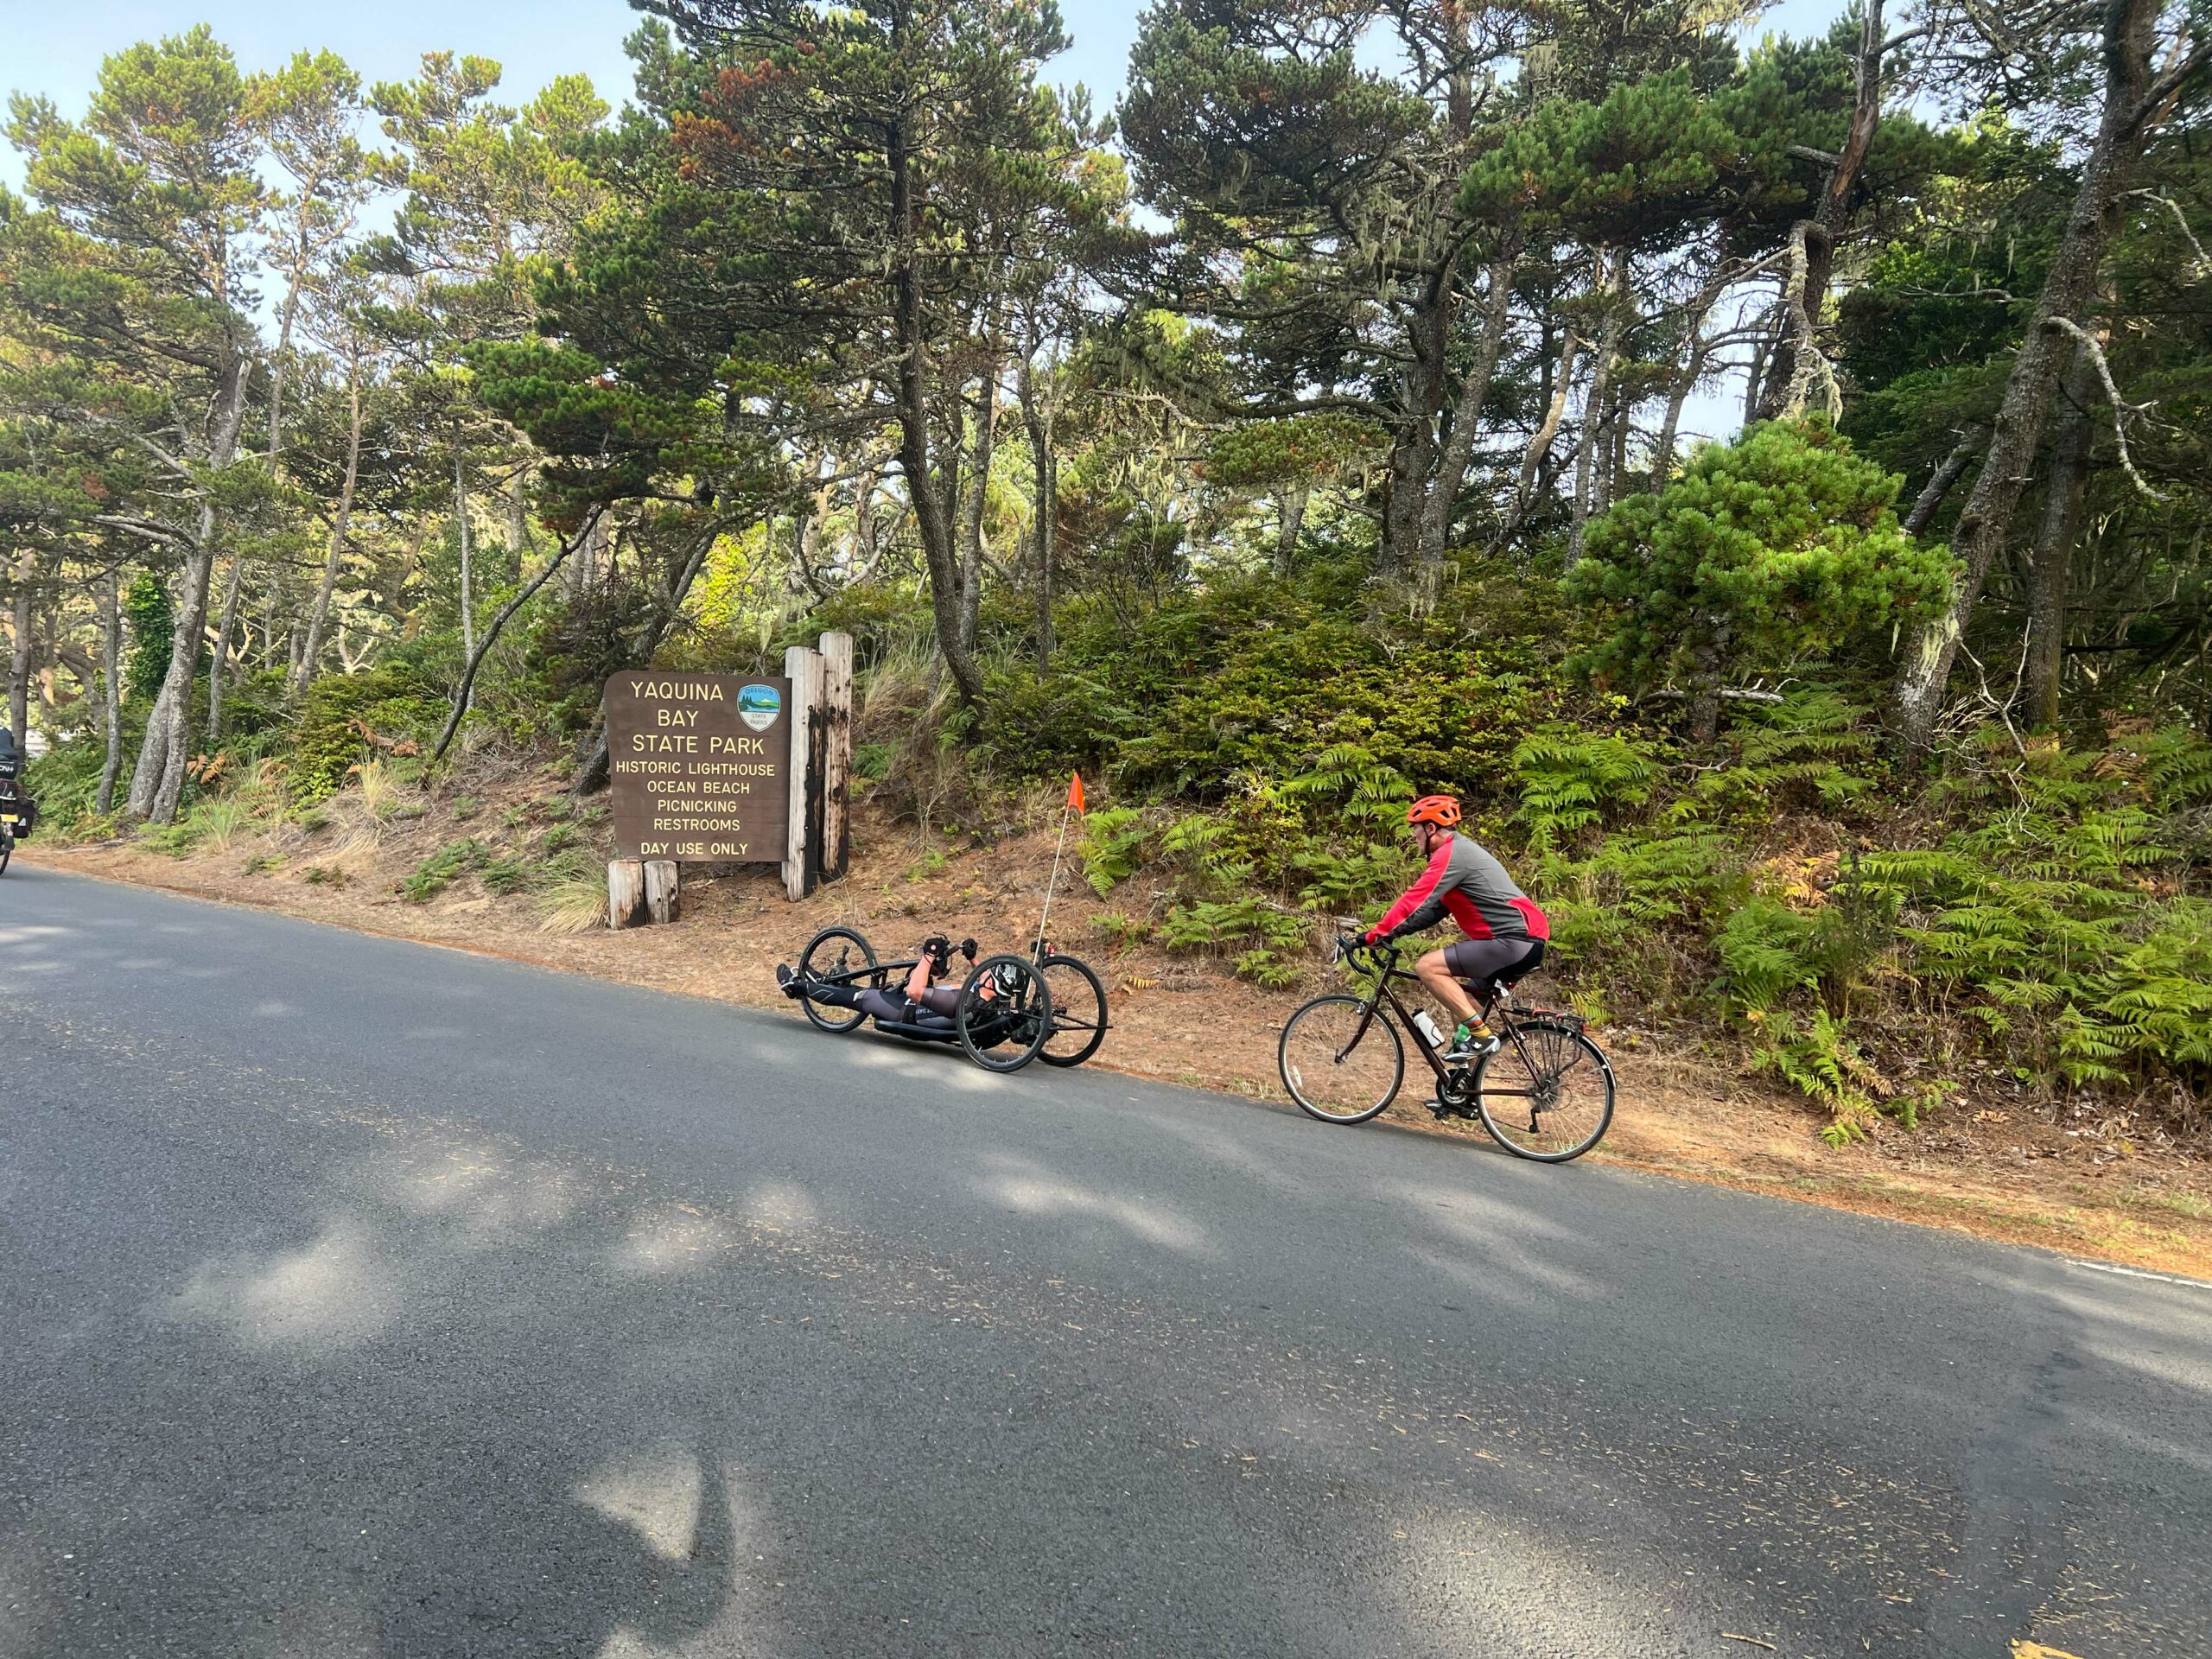 Biking uphill, an adaptive athlete in a hand-pedal bike leading with an OAS volunteer behind. Trees and shrubs in the background with a state park wooden sign shown.